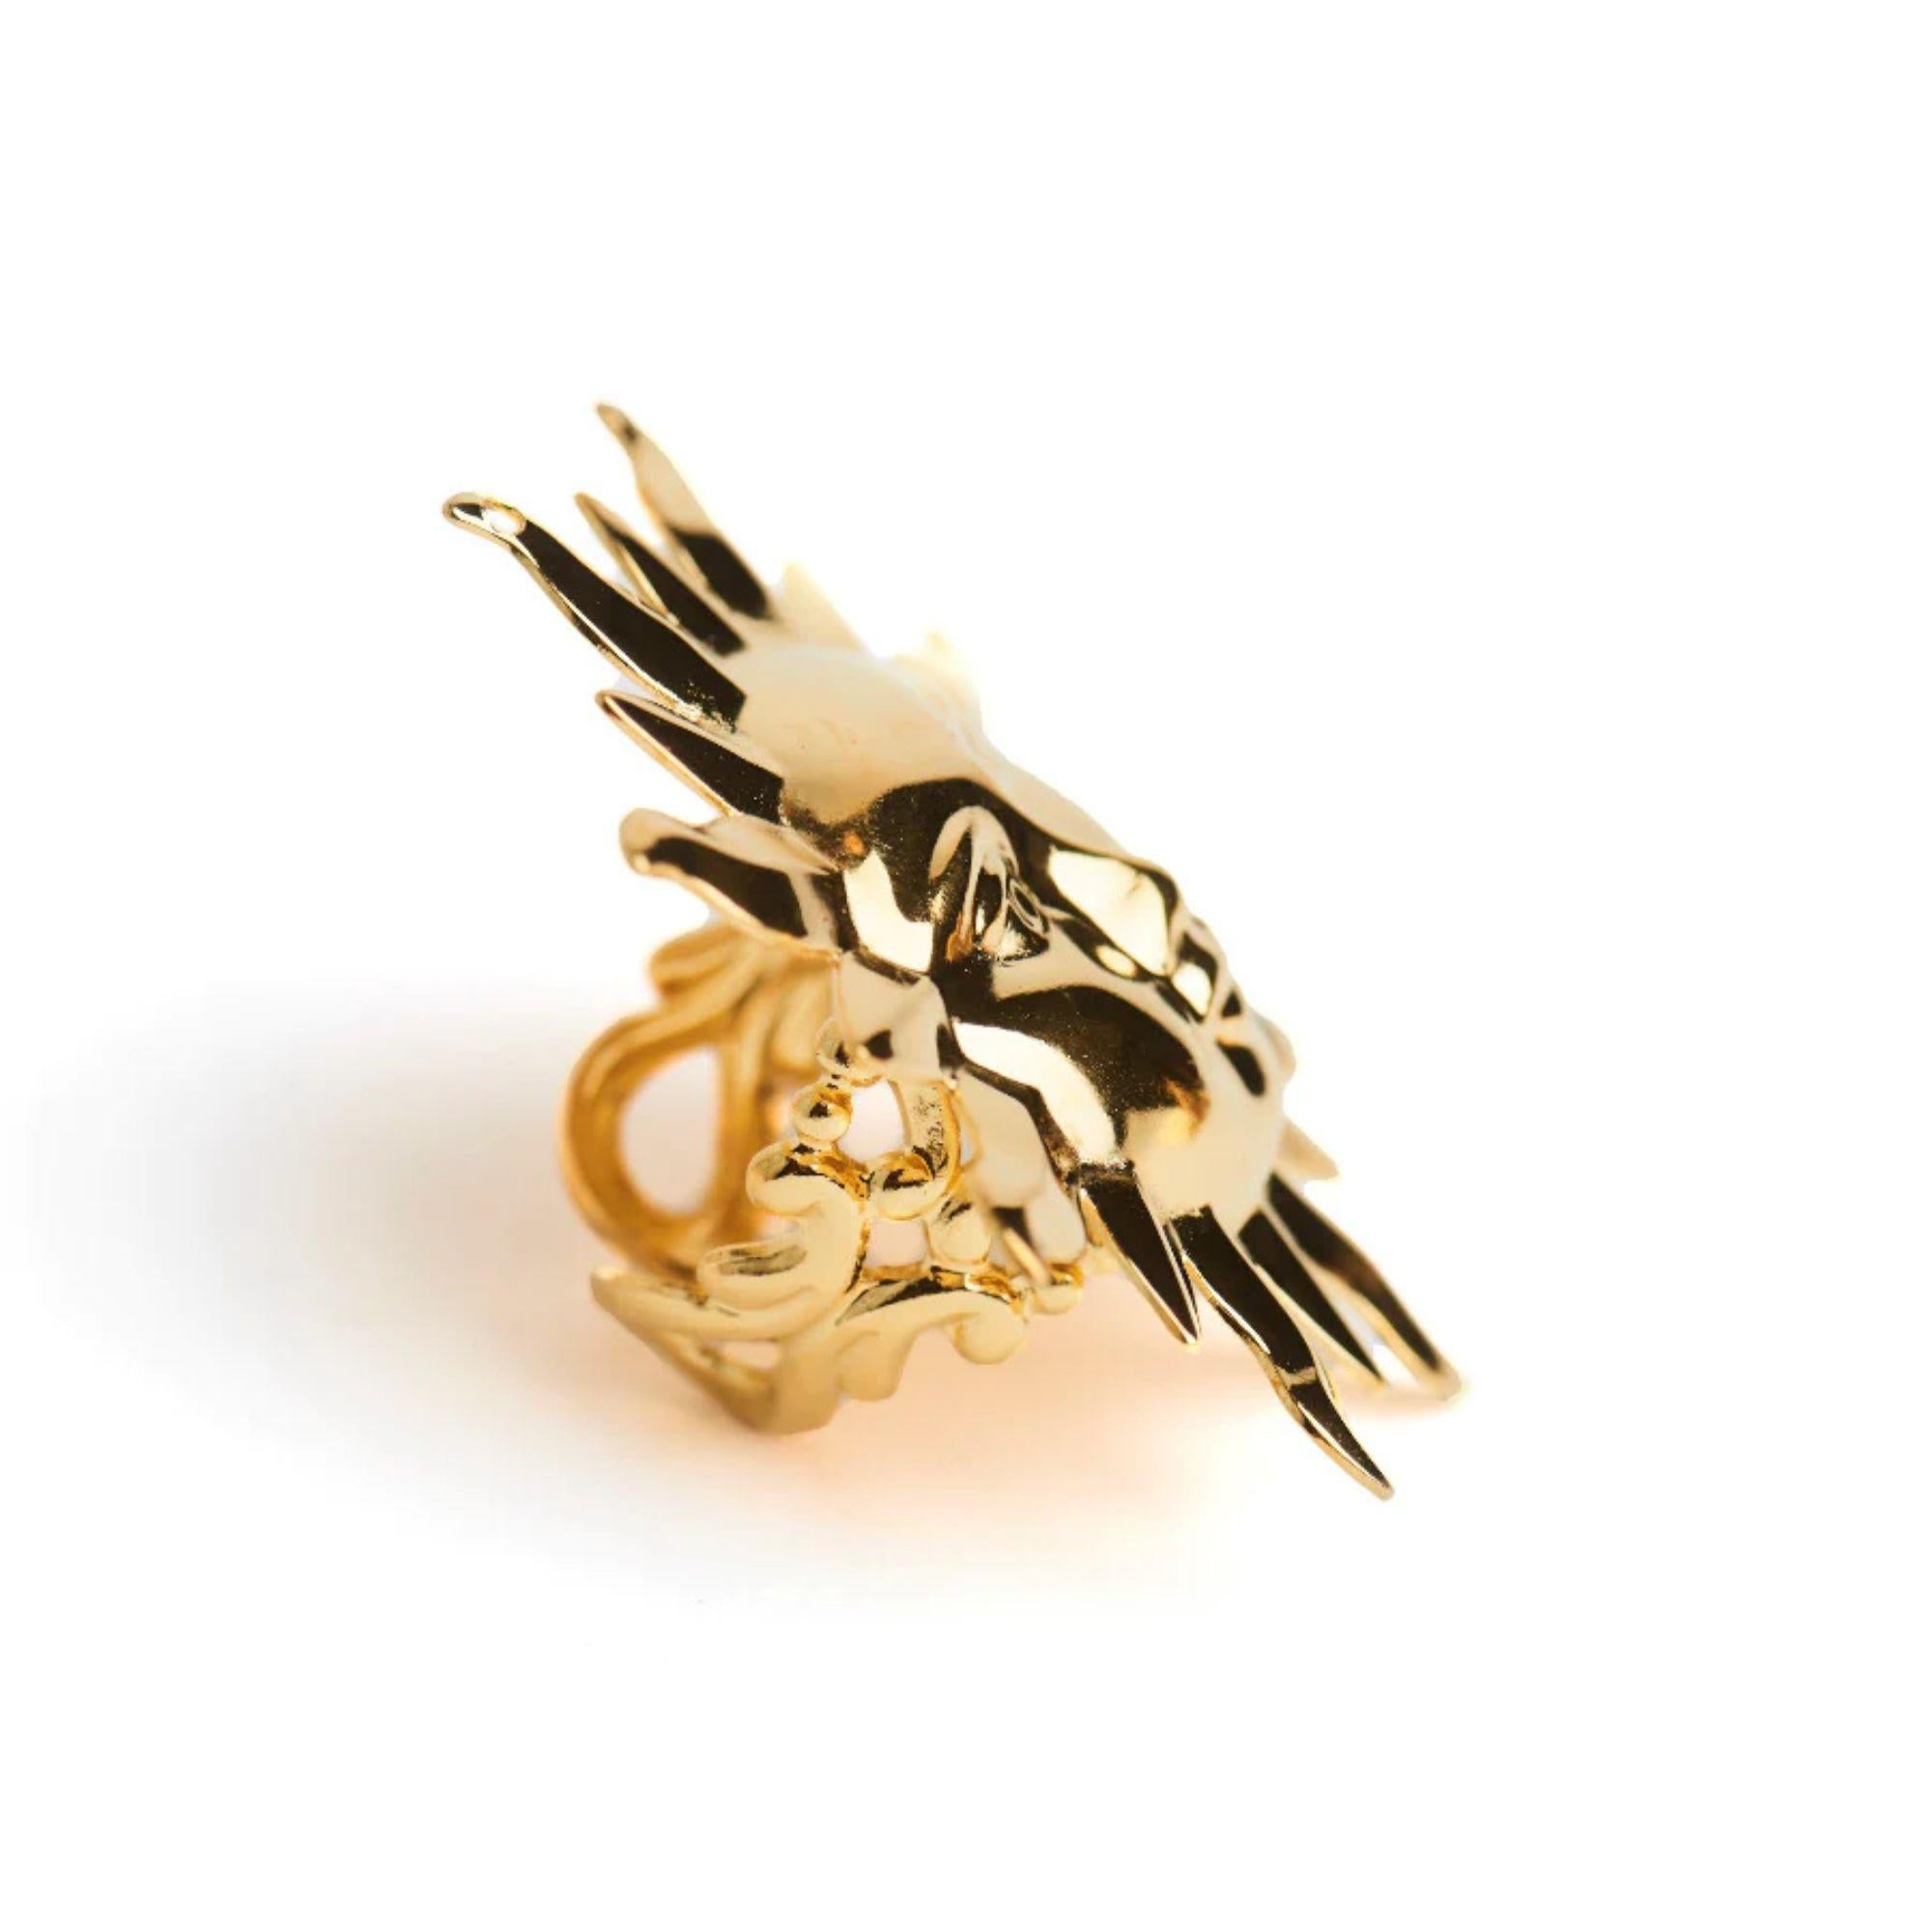 Bring the true light to your hand this Sun ring based on our classic adjustable baroque ring is the ultimate rising power ring. Made in America. Plated on Brass.

Additional Information:
Material: Brass, Sterling Silver
Dimensions: W 1.5 x L 2 x H 1